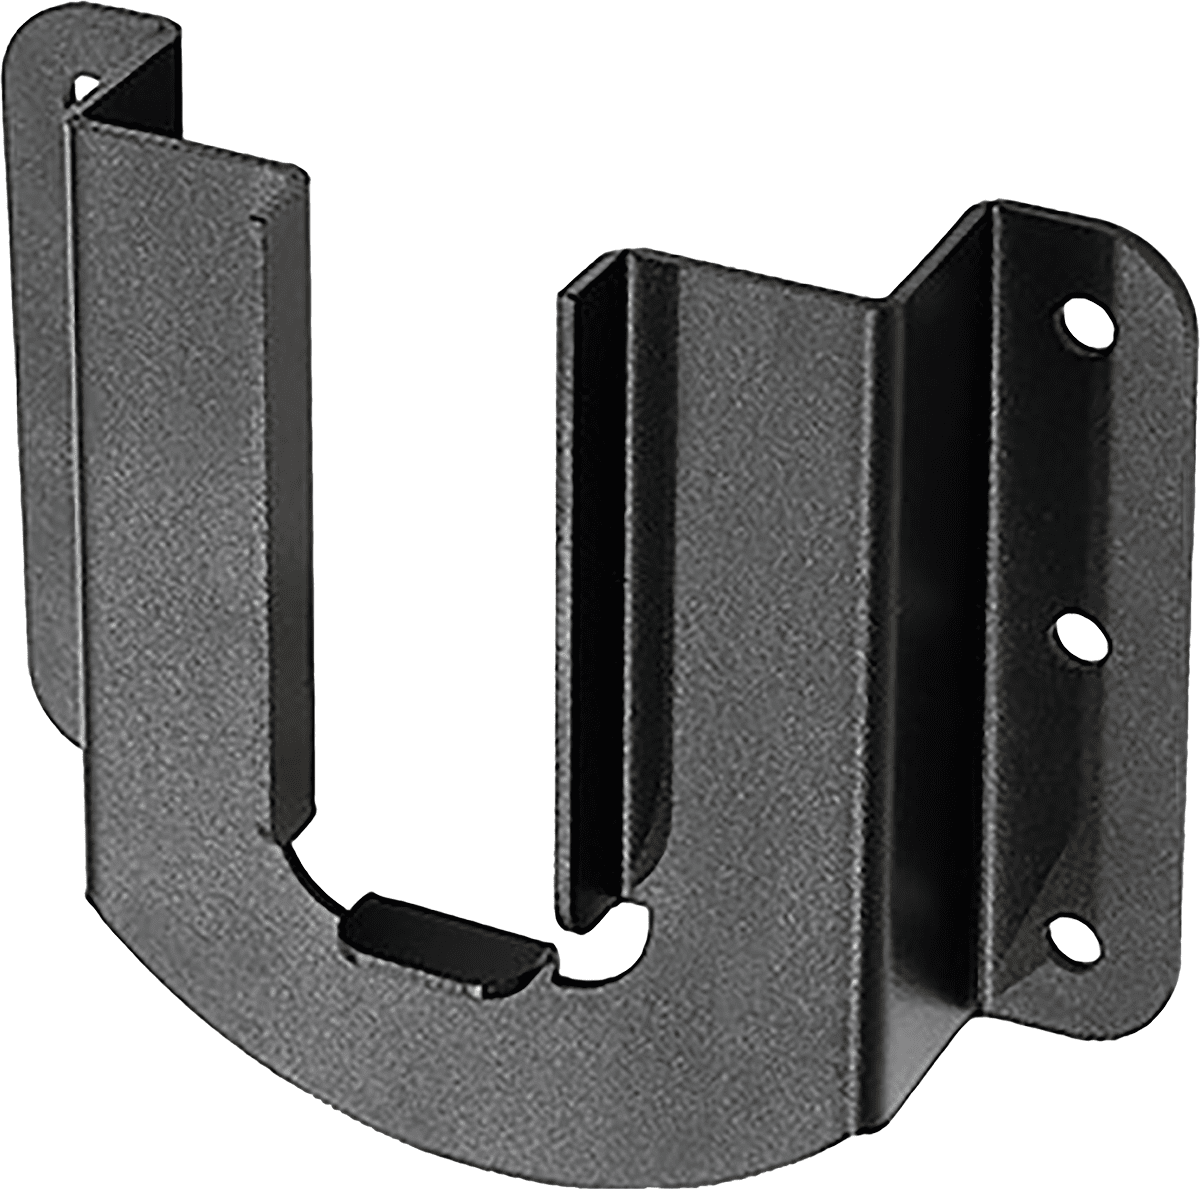 B-air Vent Air Mover Mounting Bracket